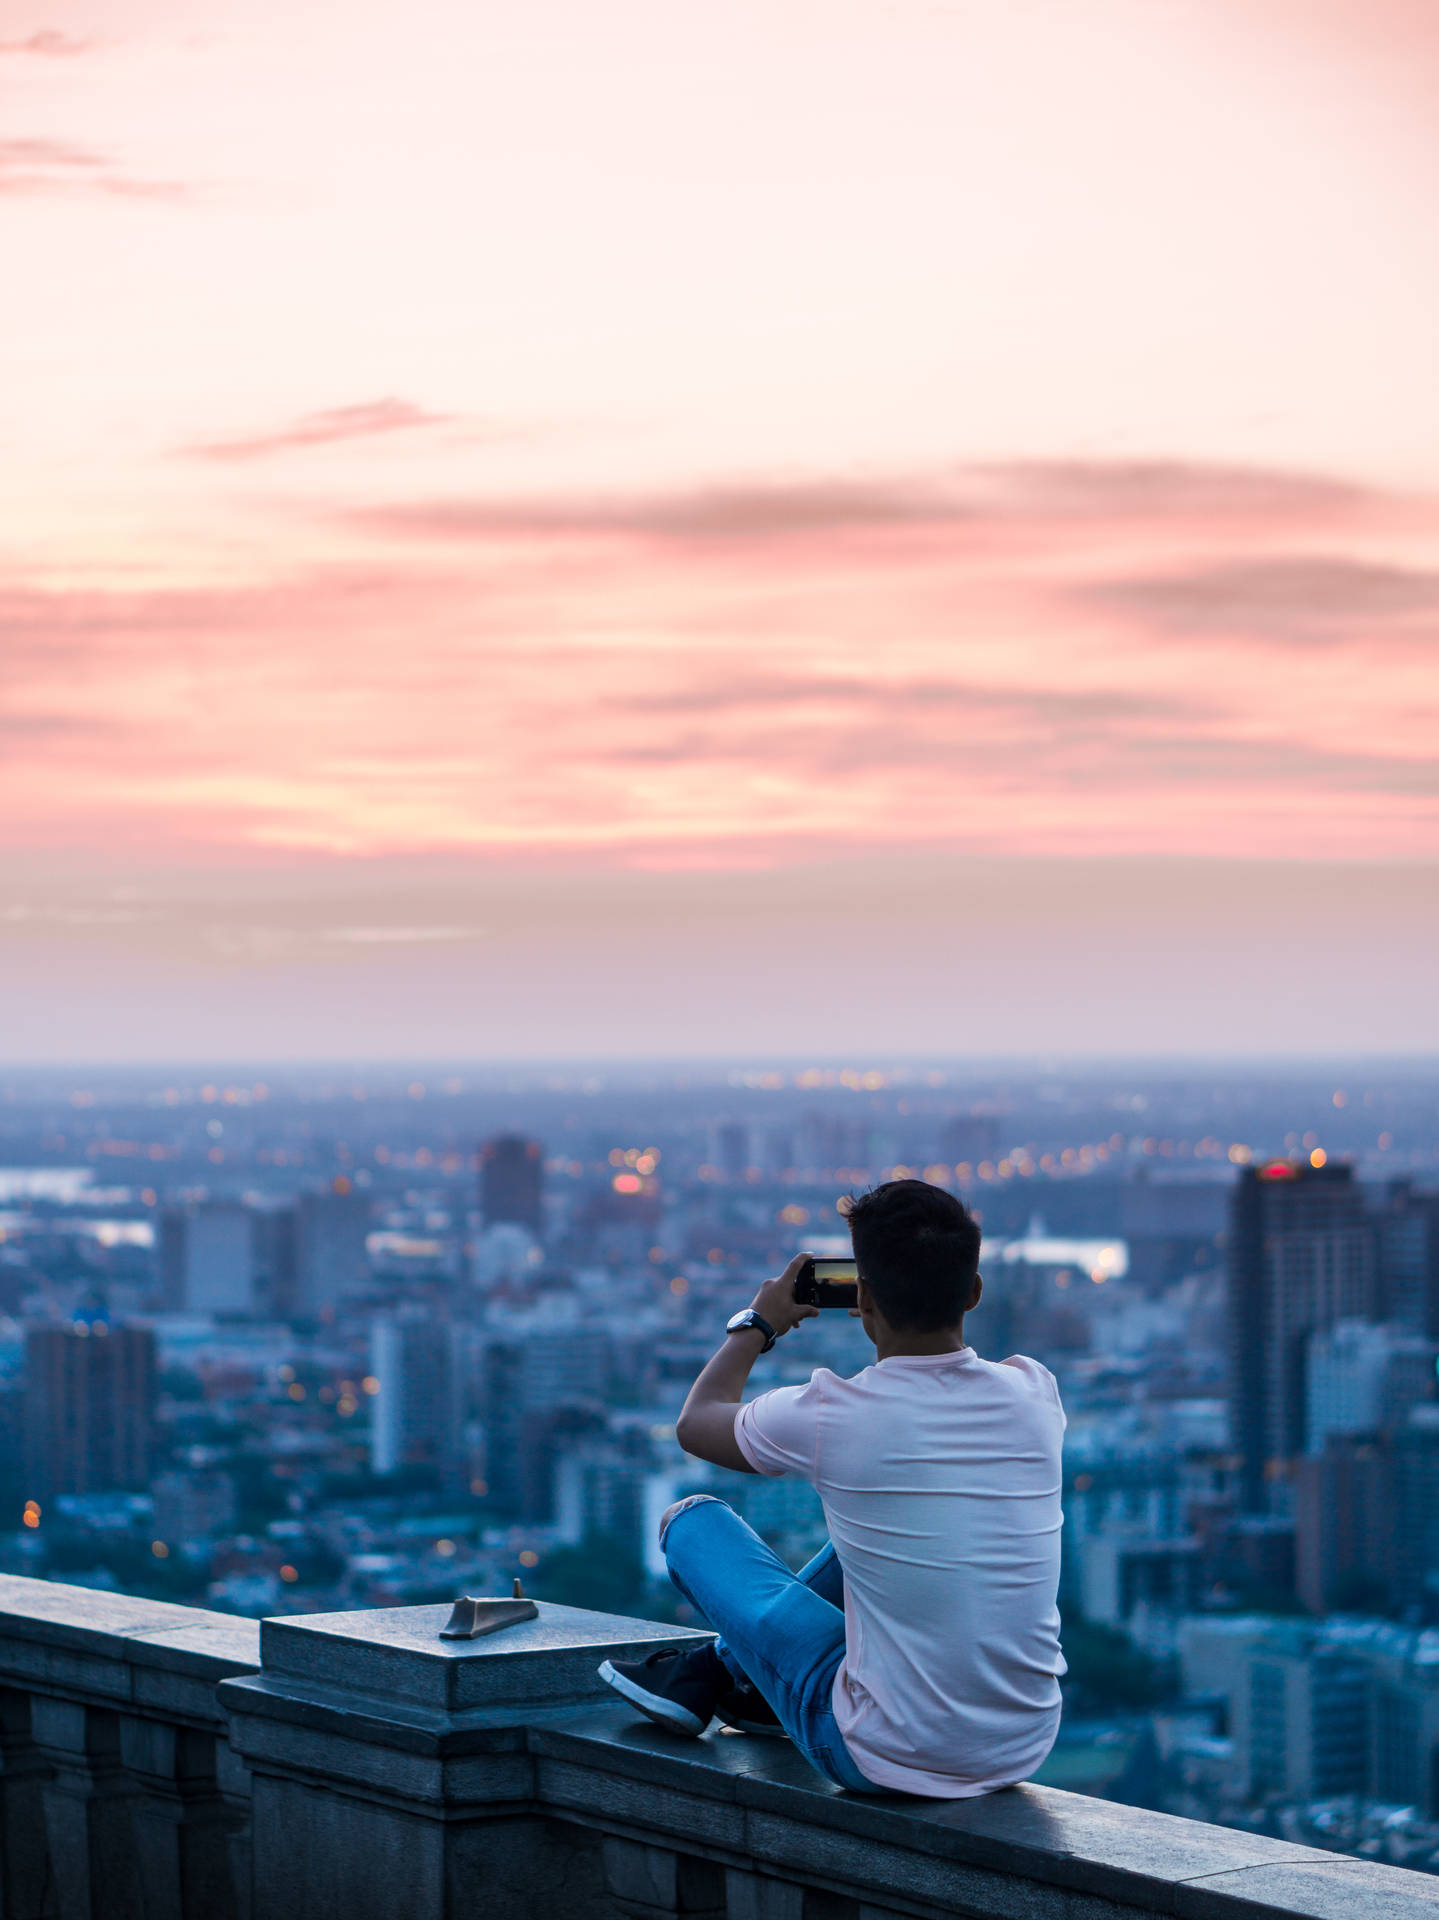 "A boy enjoying the view from the rooftop" Wallpaper